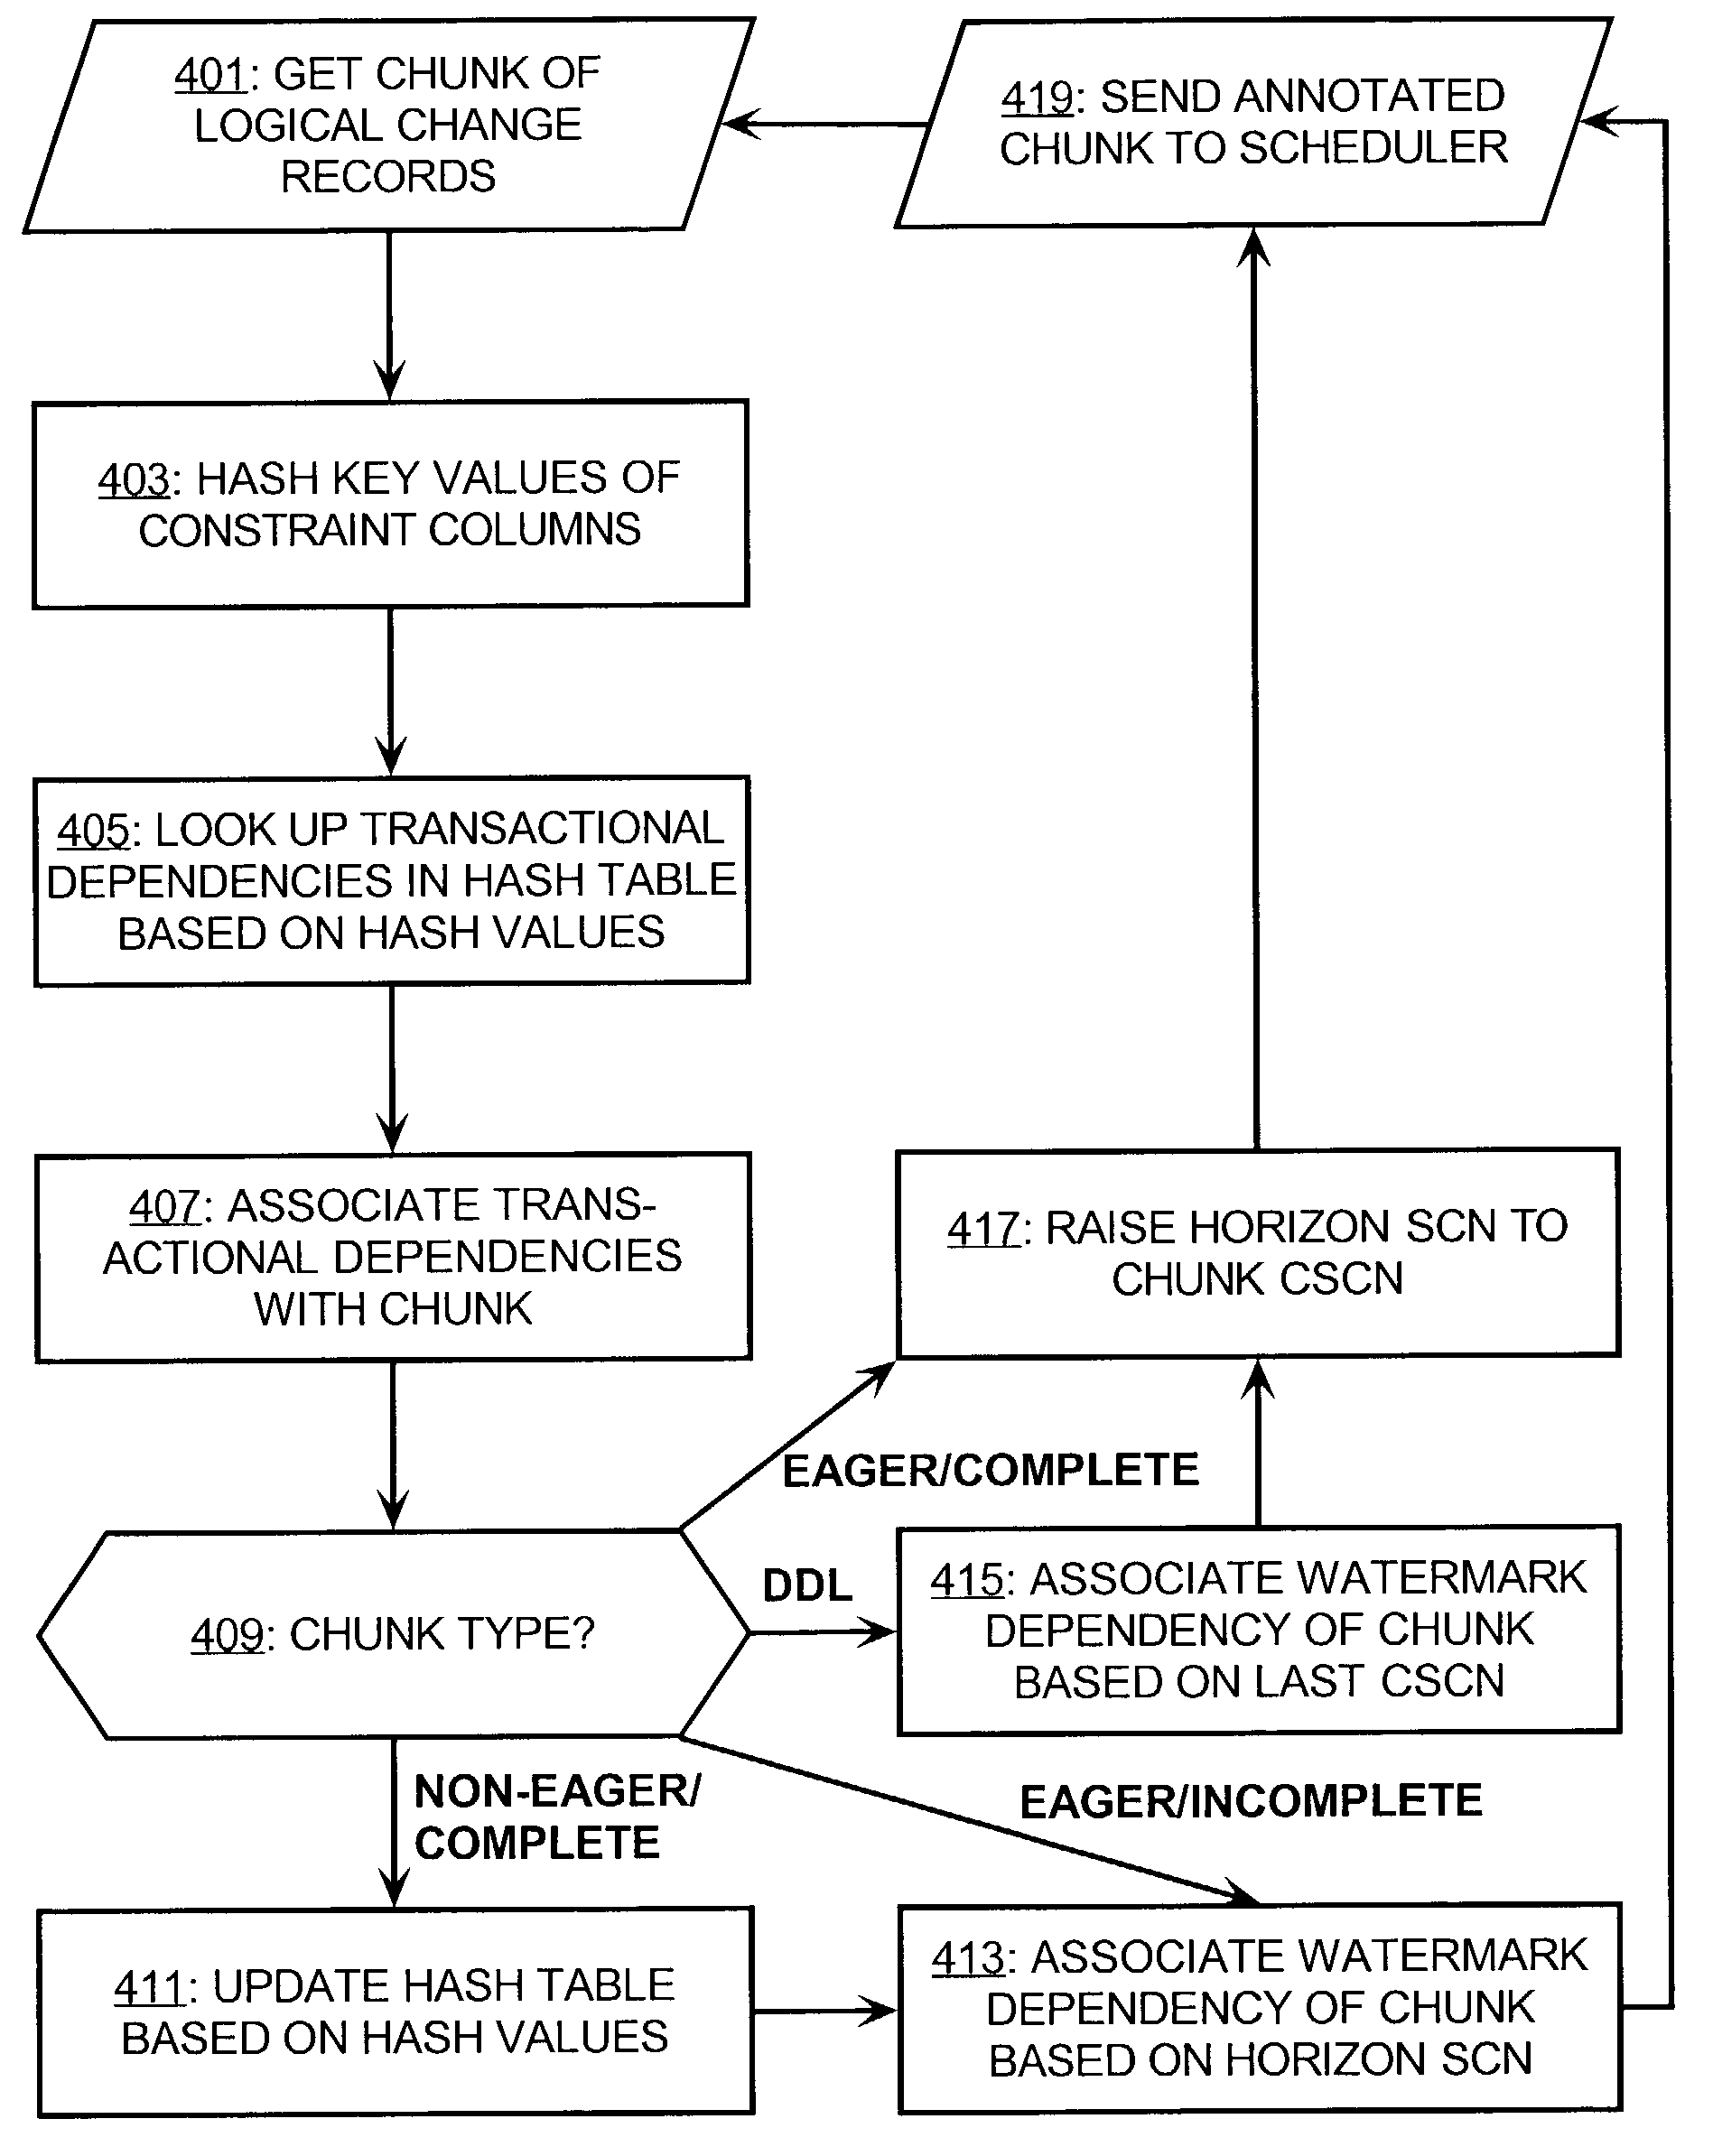 Method of applying changes to a standby database system